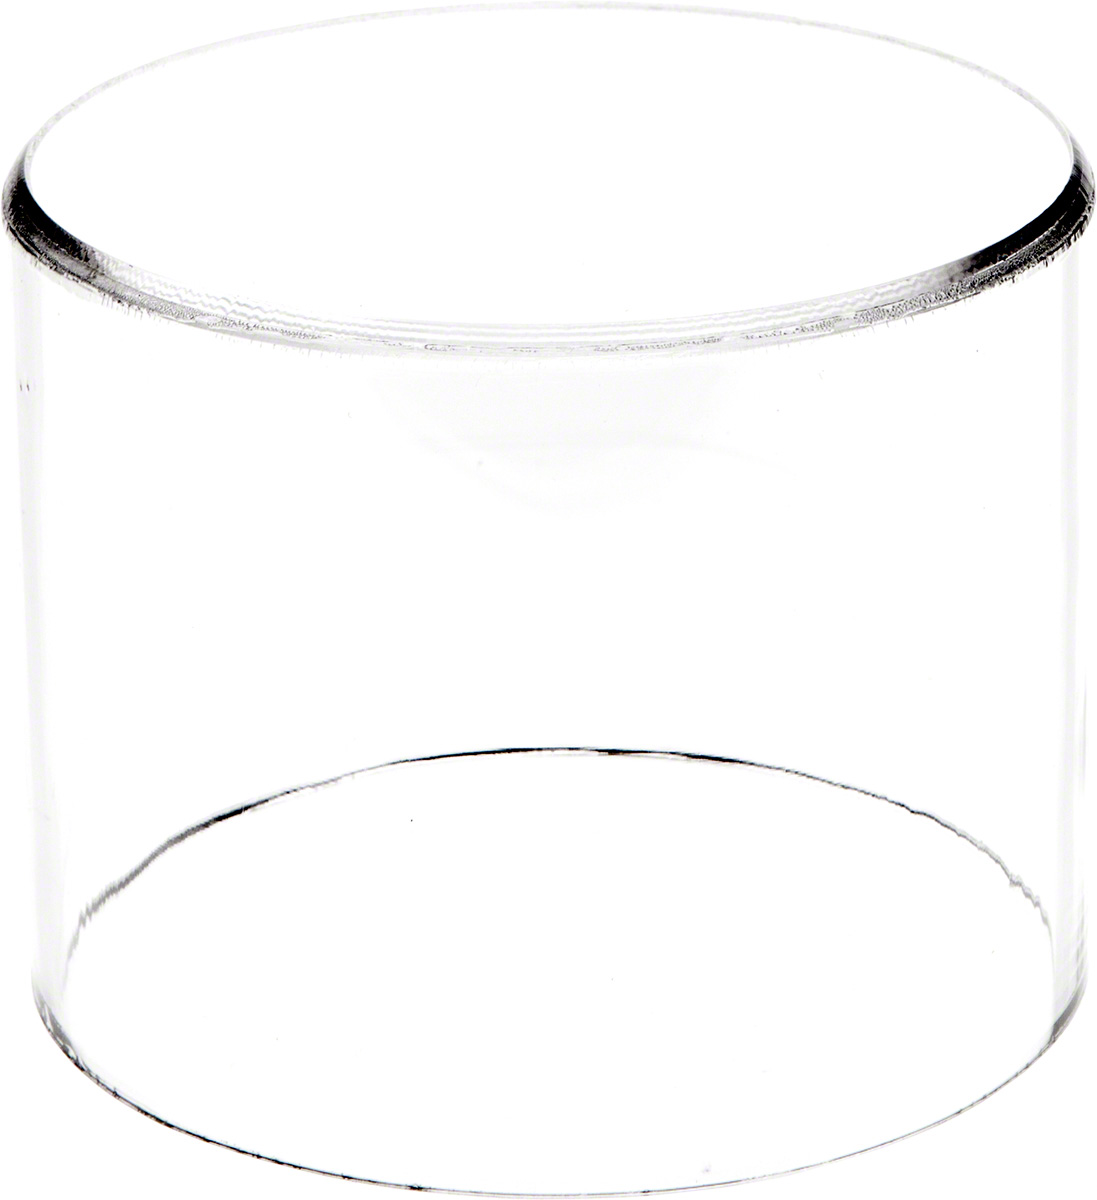 Plymor Clear Acrylic Round Cylinder Display Riser, 4 inches (Height) x 5 inches (Depth)